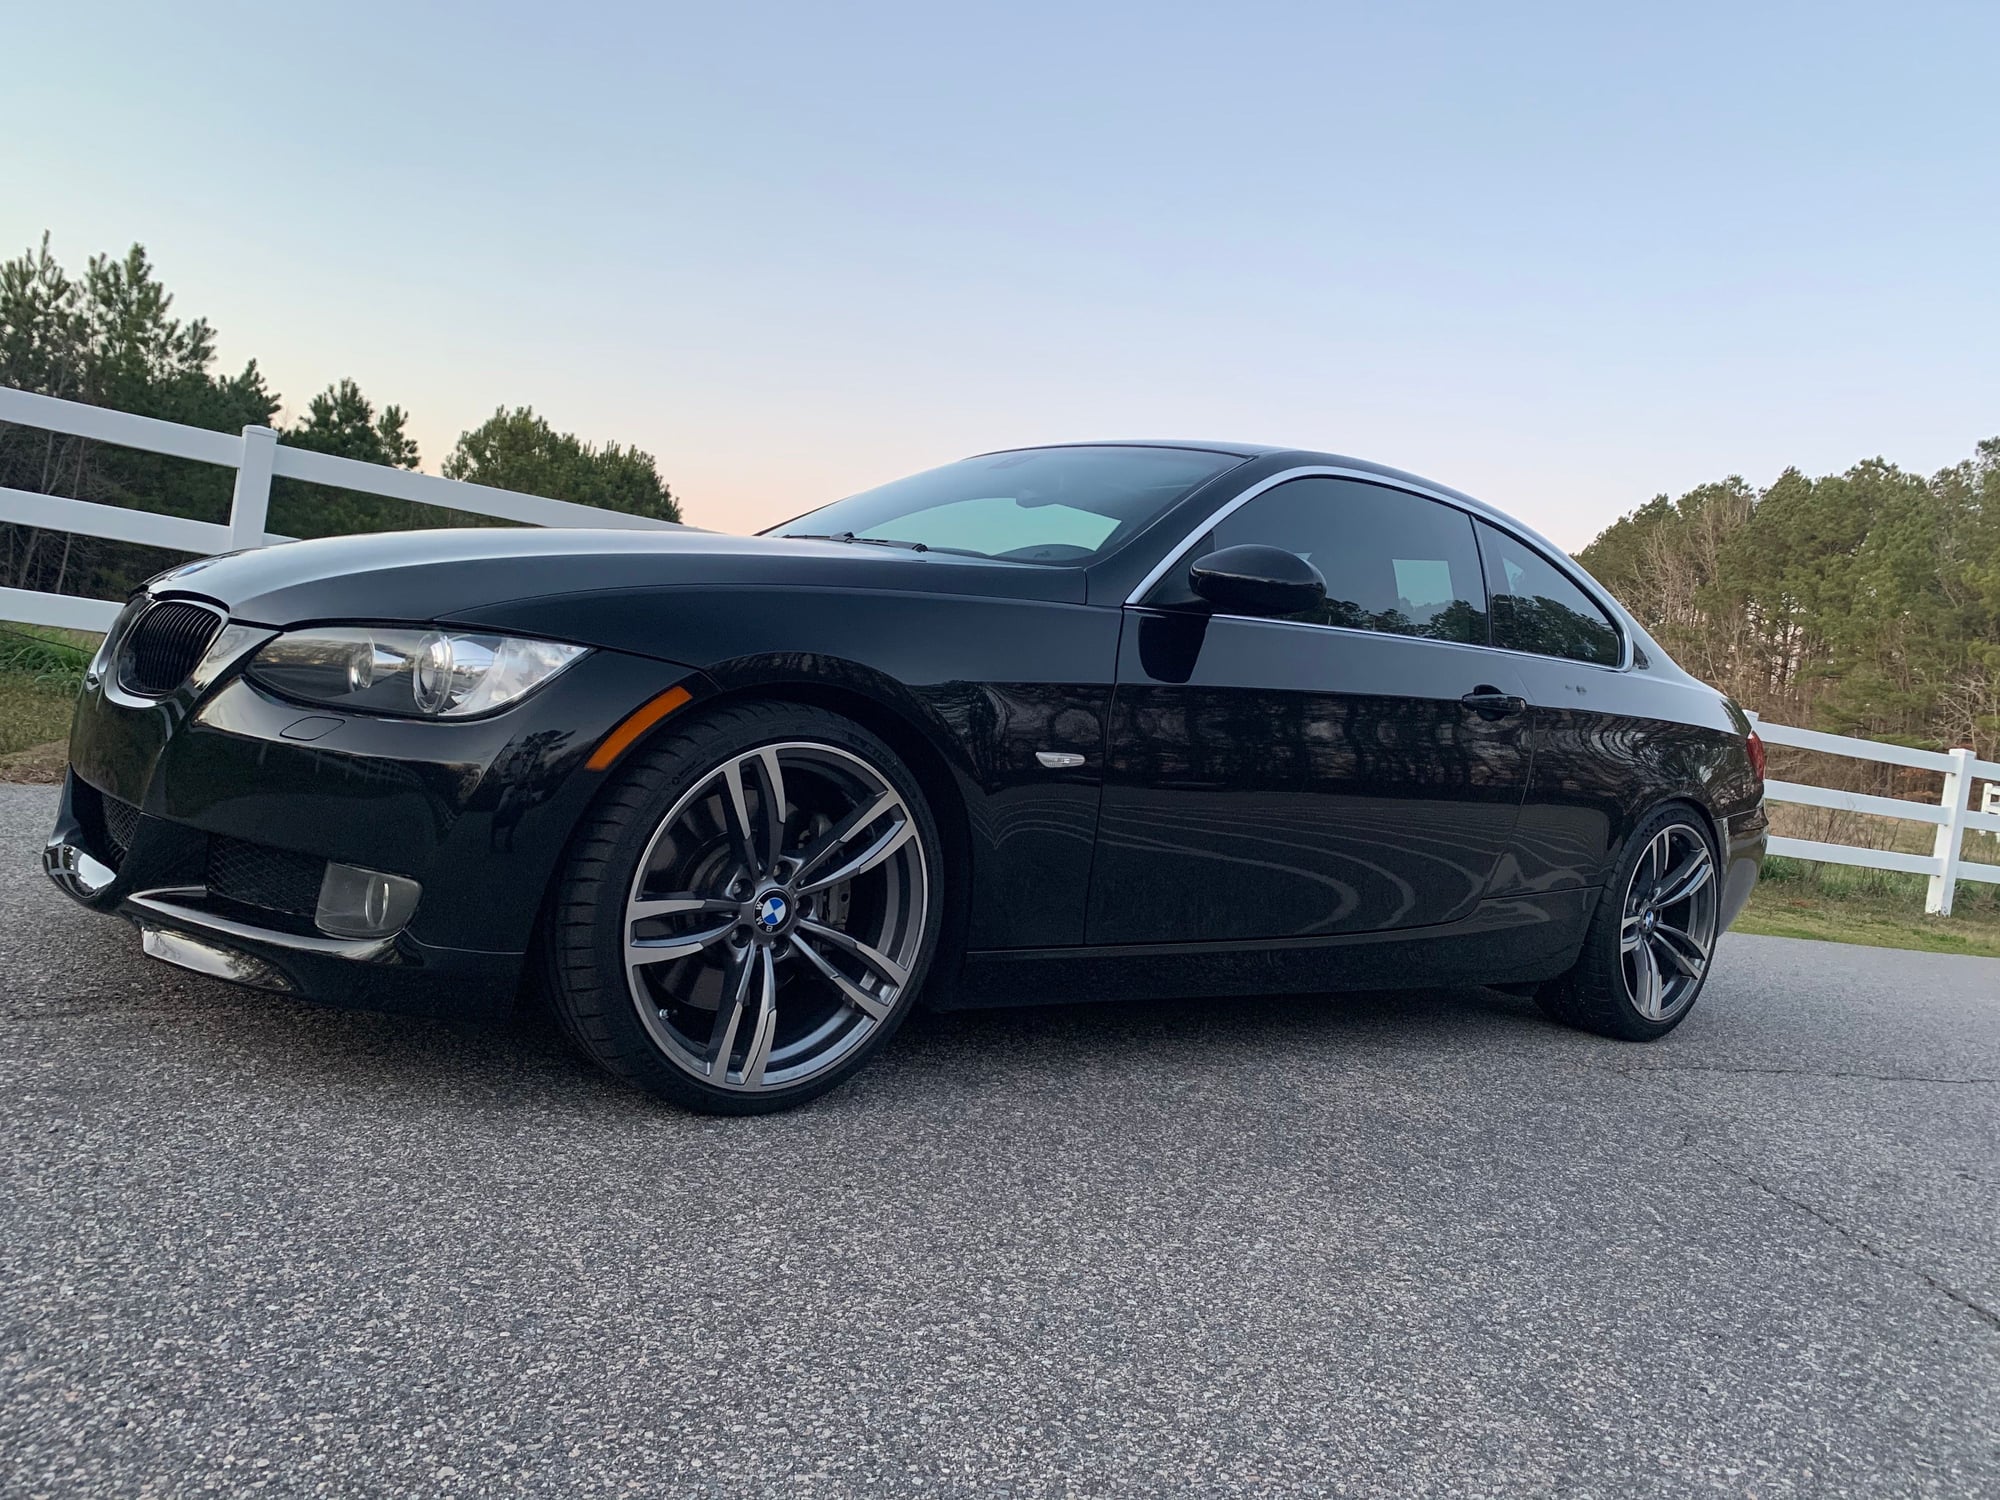 WTT (Want To Trade) 600hp BMW 335i Upgraded Turbos - Very Clean